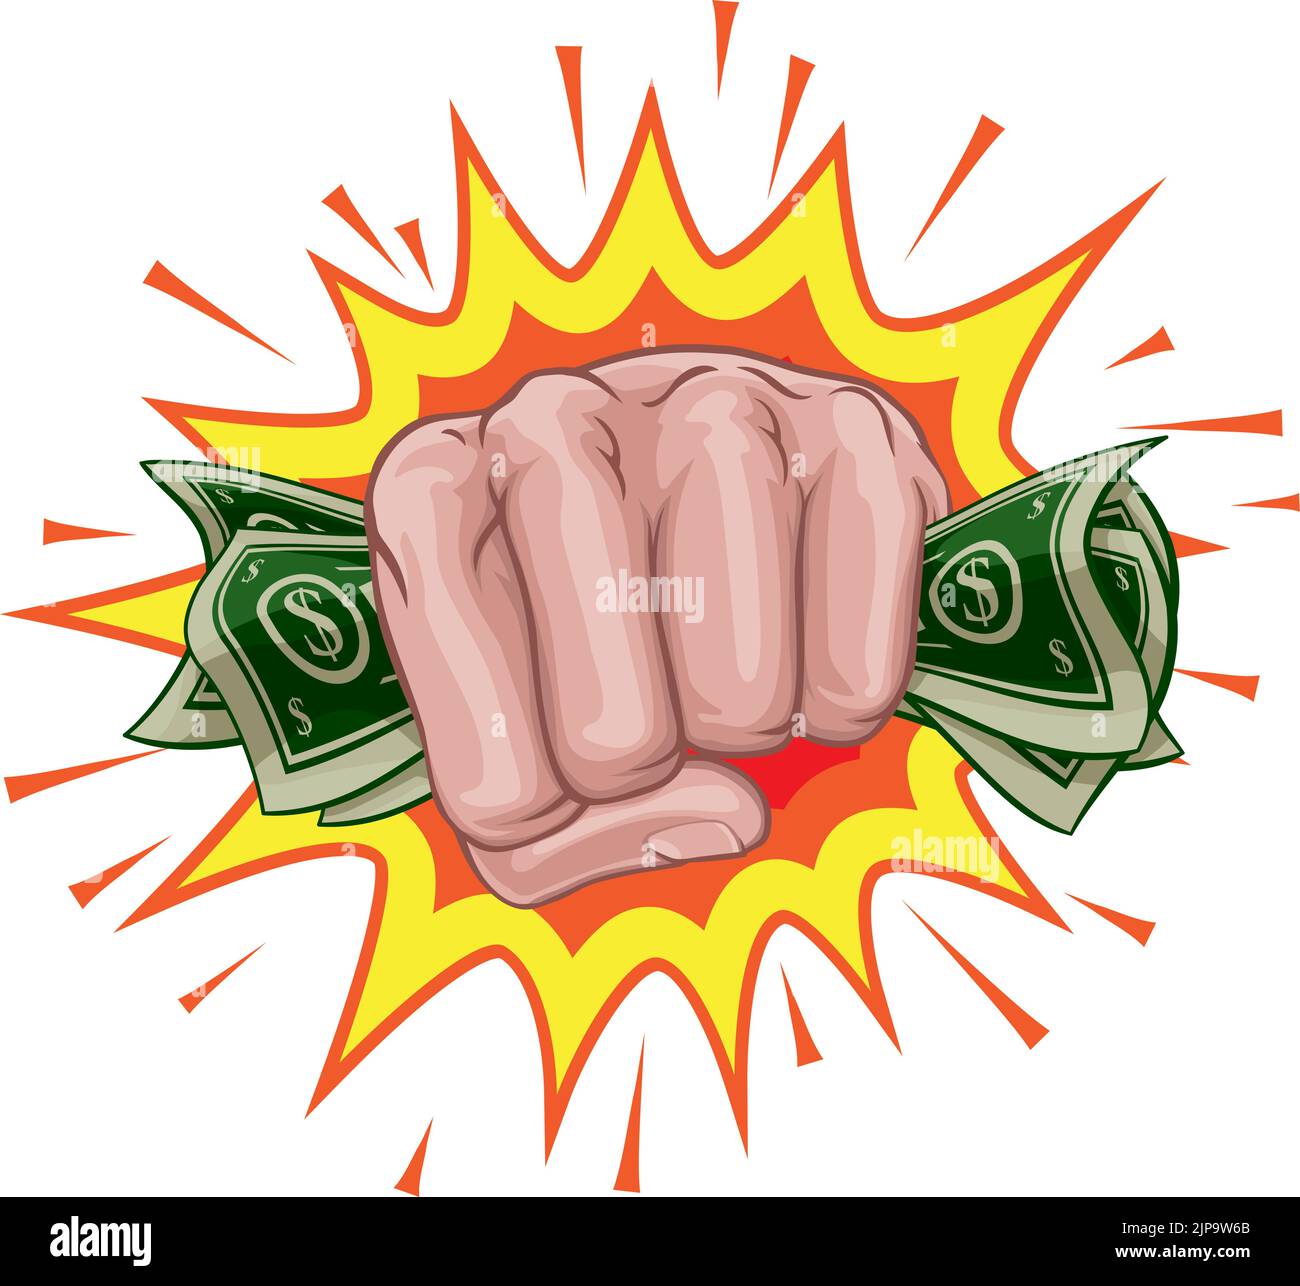 A hand in a fist squeezing cash money dollar bills. In a comic book pop art cartoon illustration style. With an explosion in the background Stock Vector